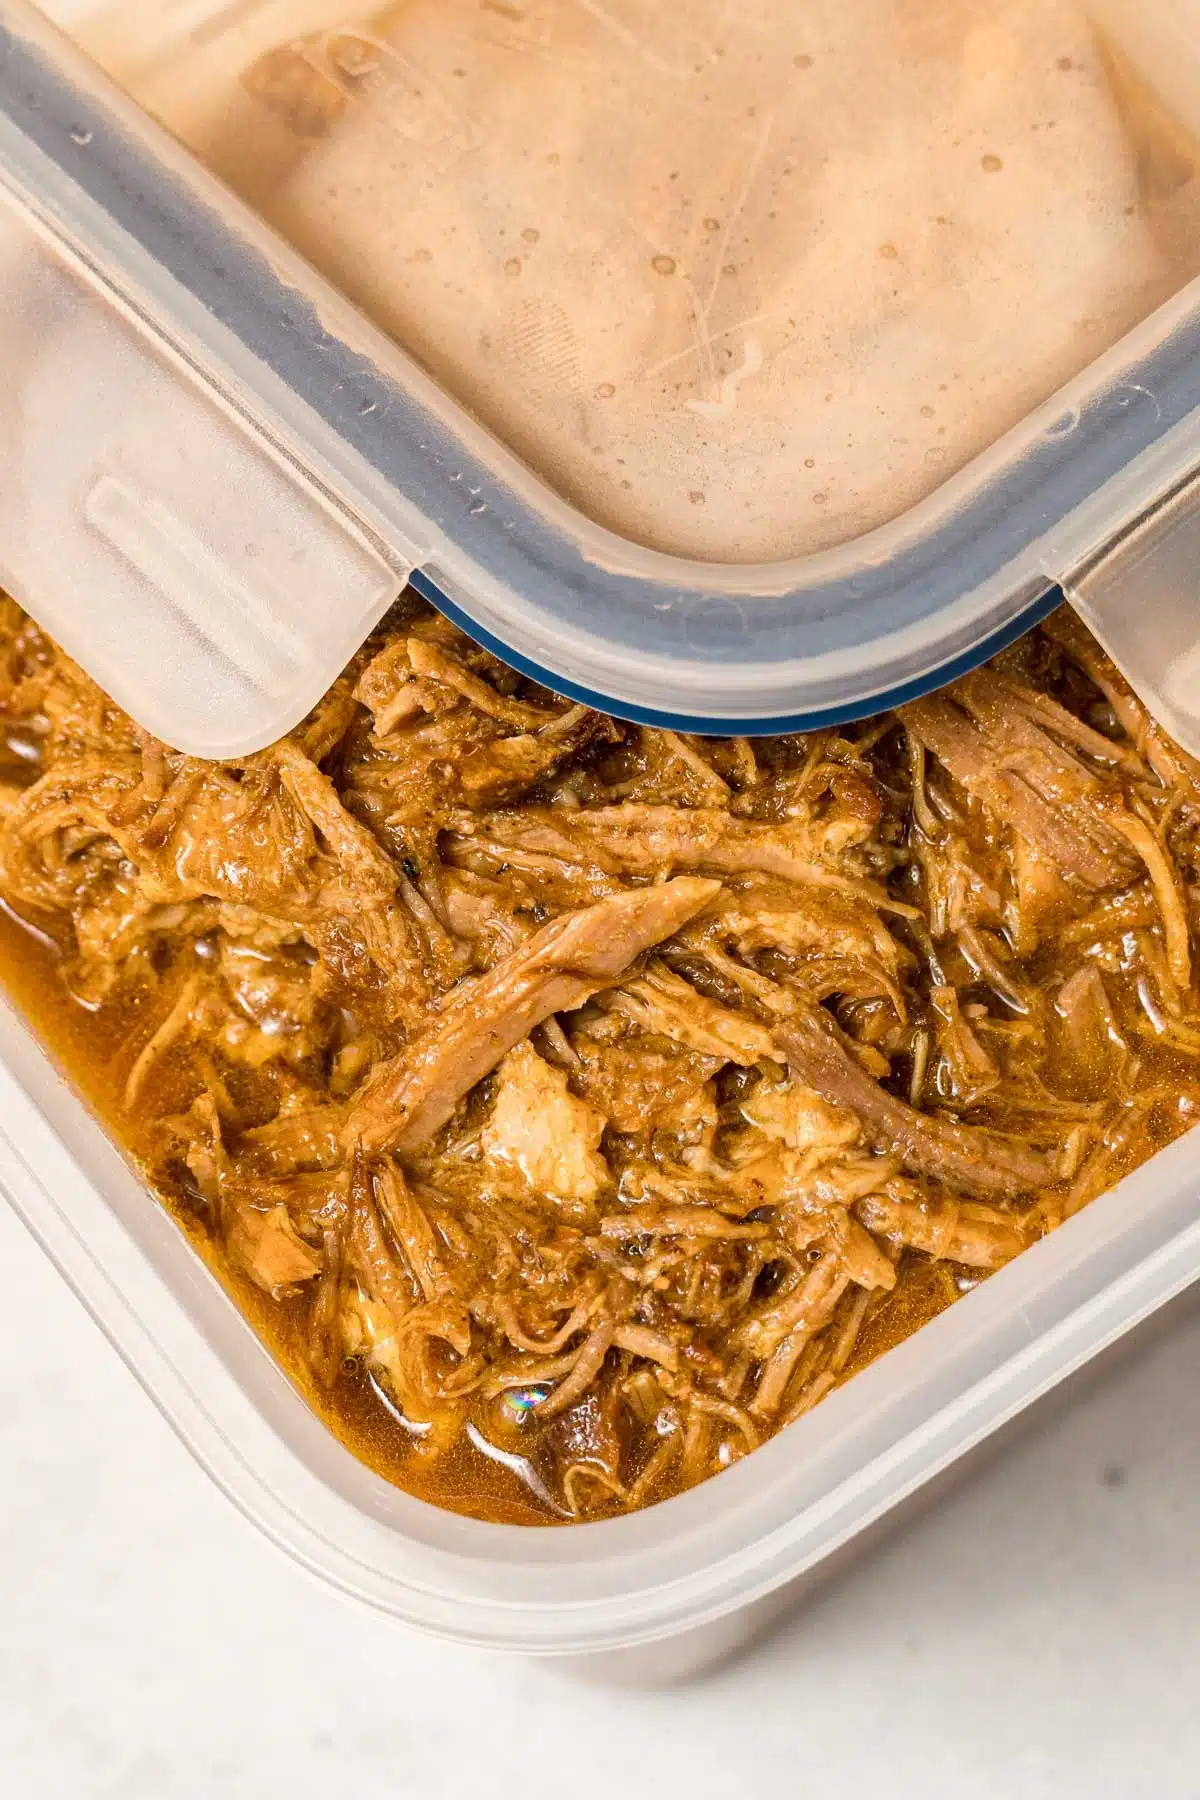 Pulled pork in a plastic storage container.